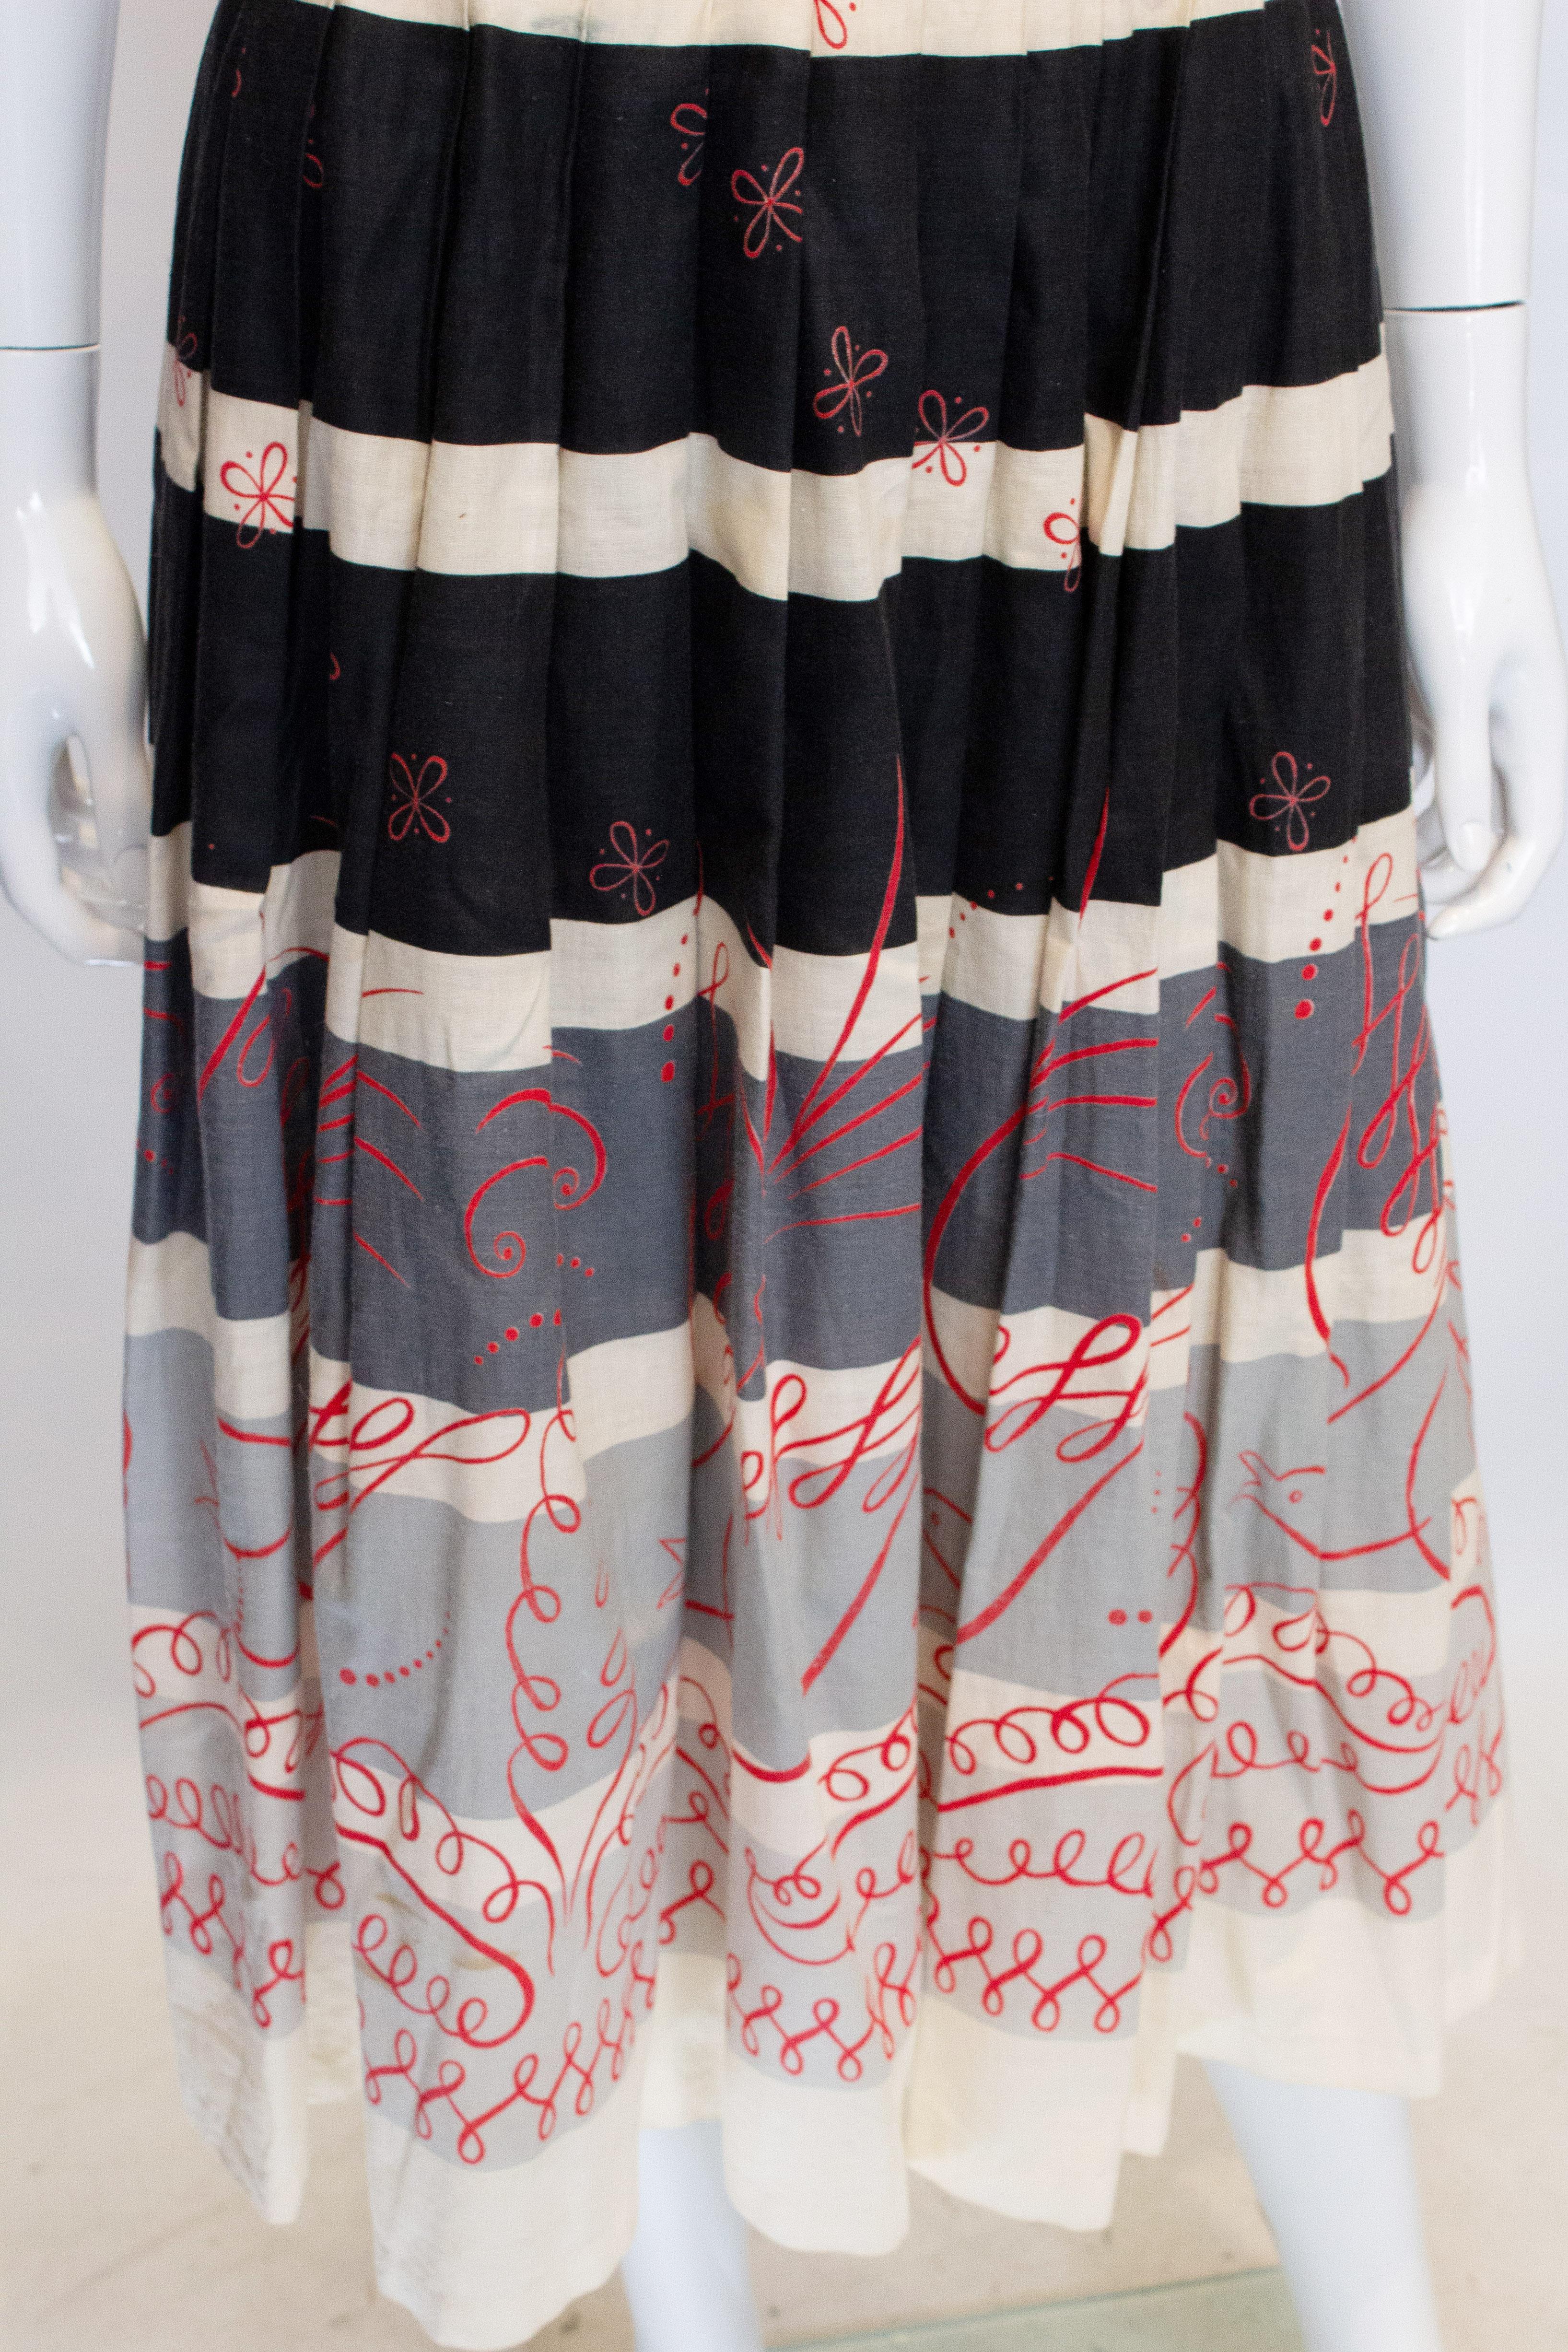 A fun vintage cotton skirt by Cruise Cotton by the Ideal Dress Co Ltd.
The skirt is in a black, white , red and grey print with a side zip opening.